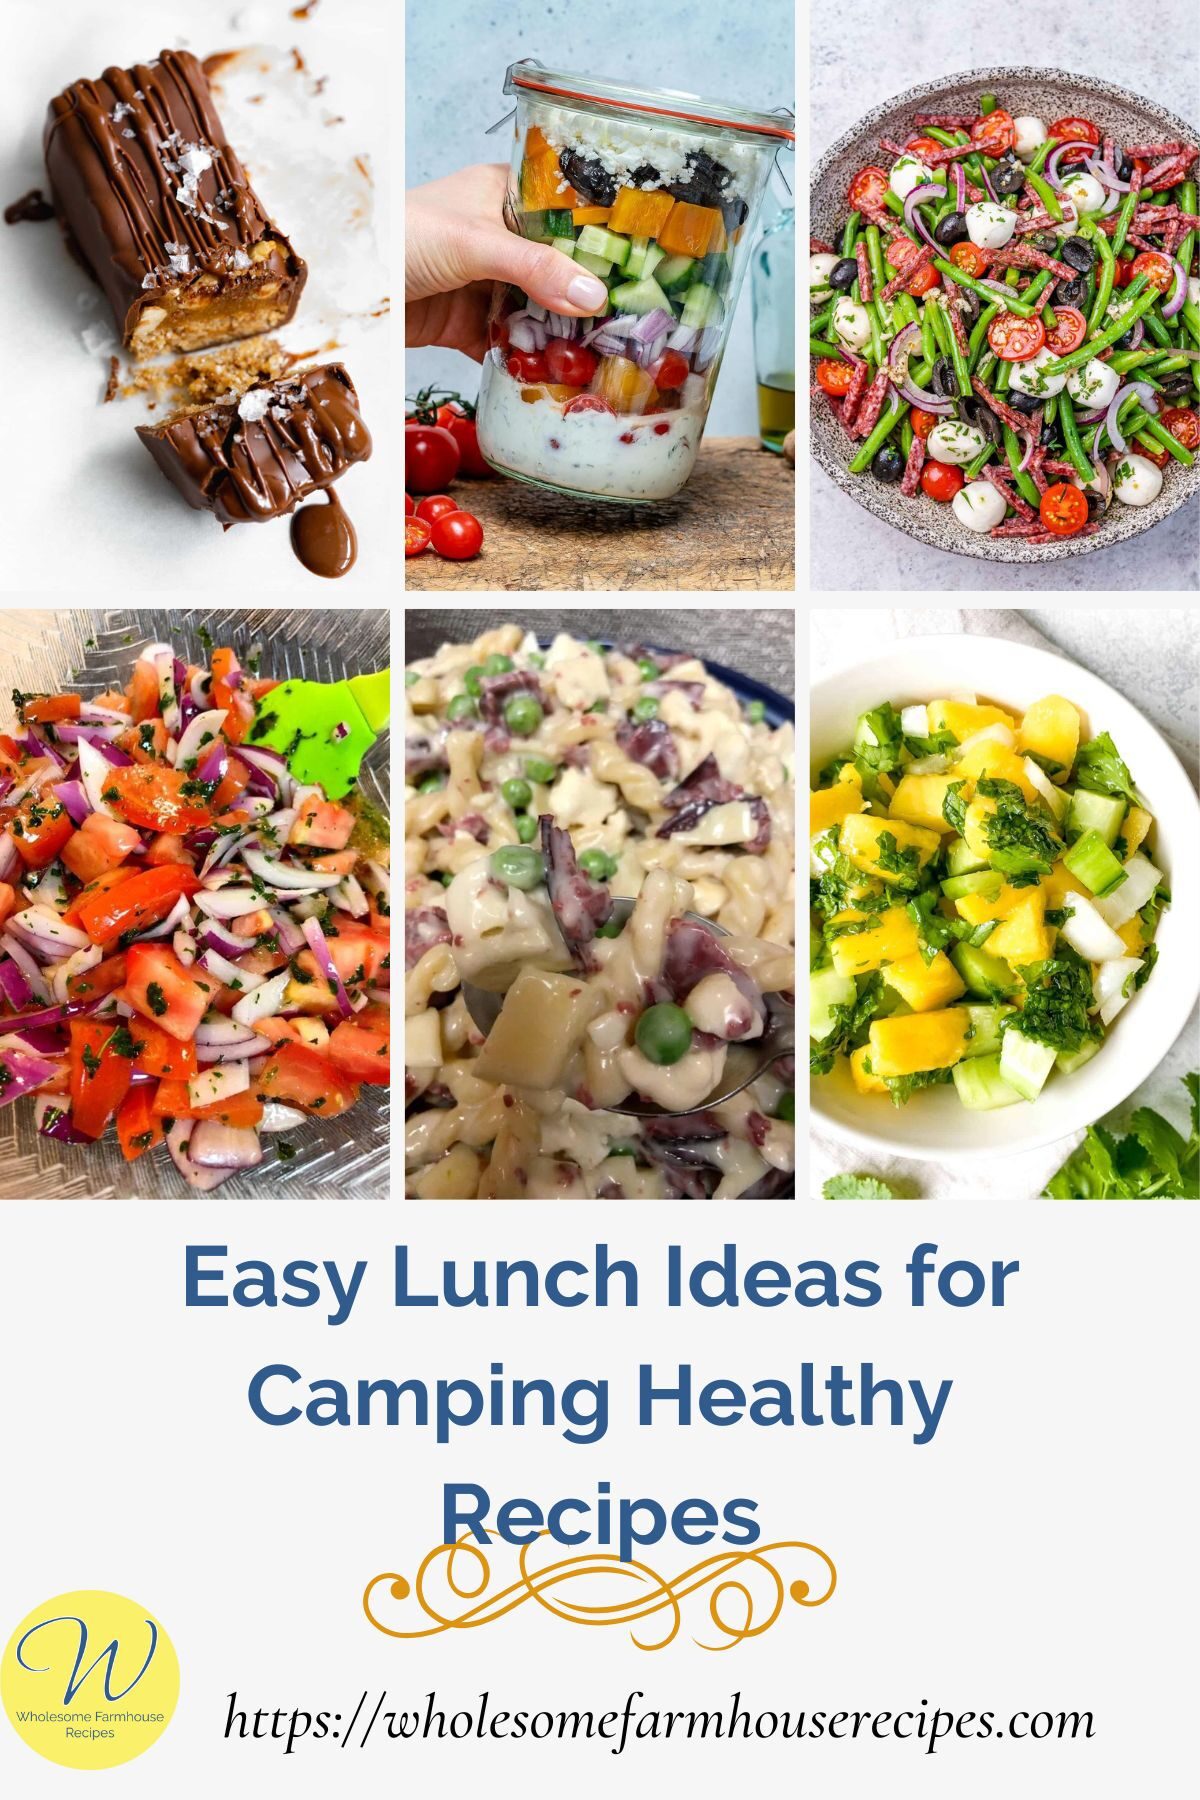 Easy Lunch Ideas for Camping Healthy Recipes